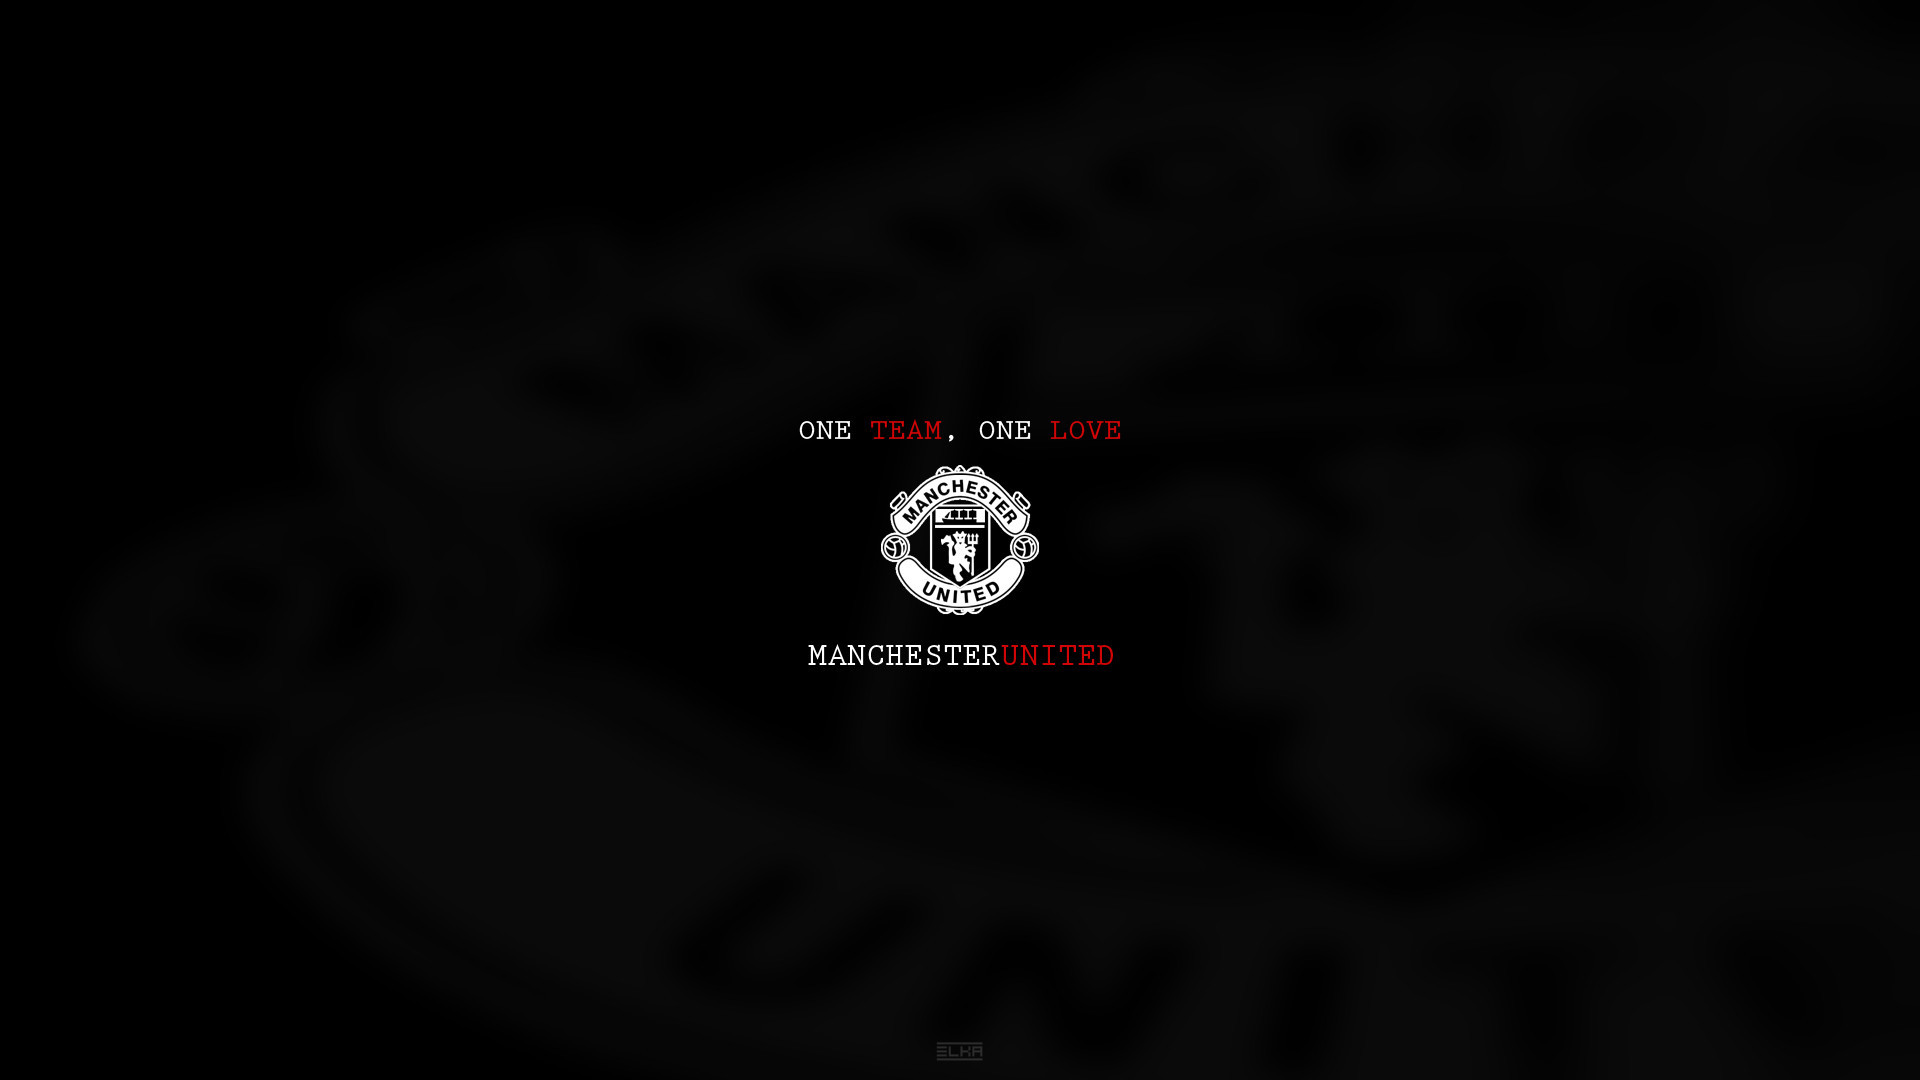 2560x1440 Manchester United Wallpaper Hd 2022 Download 1920x1080